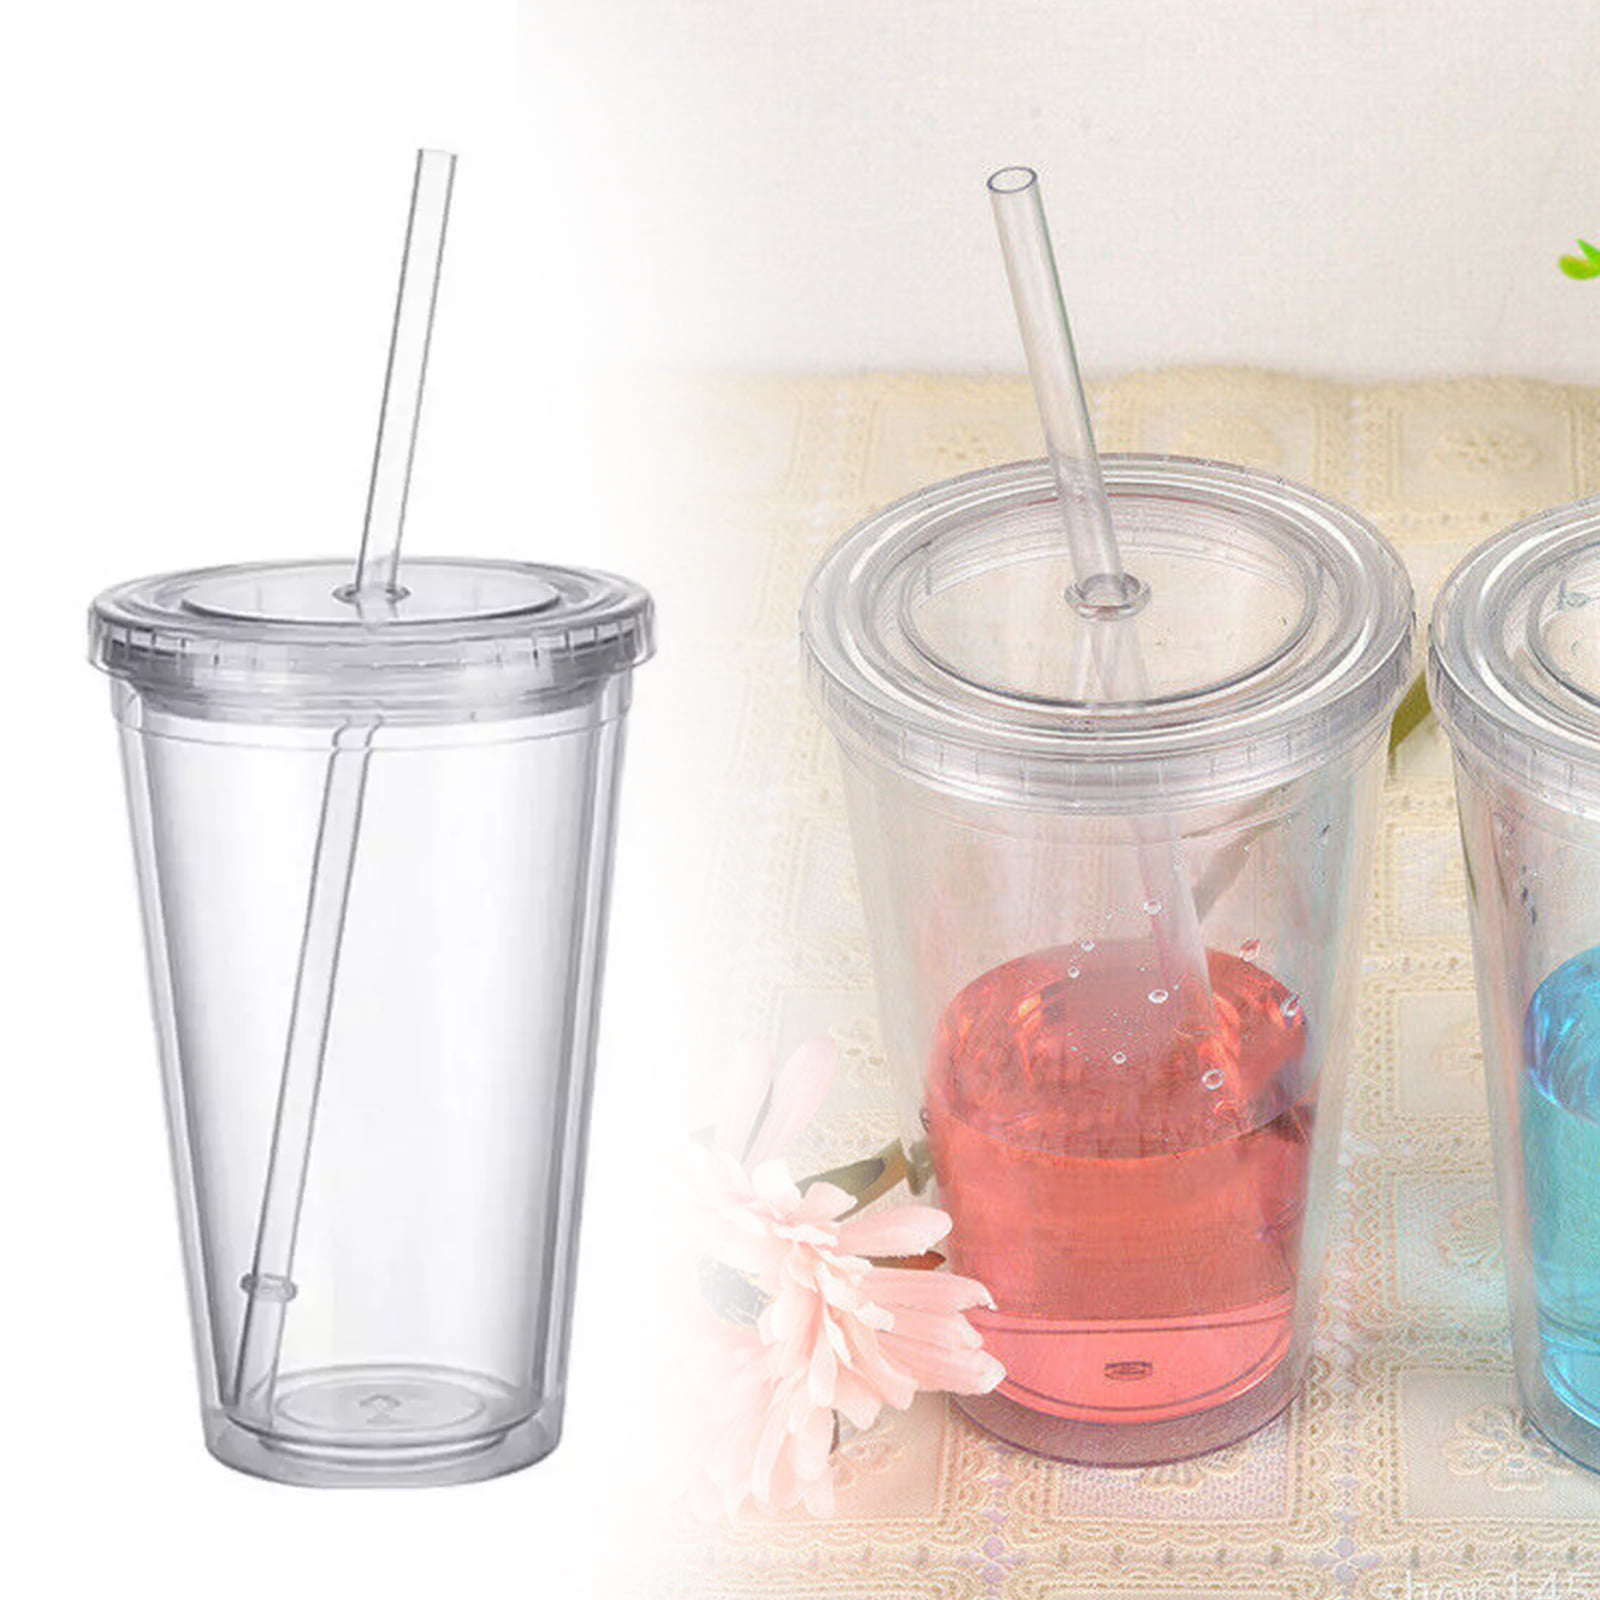 Nuanchu 12 Pcs Bulk Tumbler with Lid and Straw 14oz Plastic Cups for Adult  Reusable Coffee Cup Drink…See more Nuanchu 12 Pcs Bulk Tumbler with Lid and